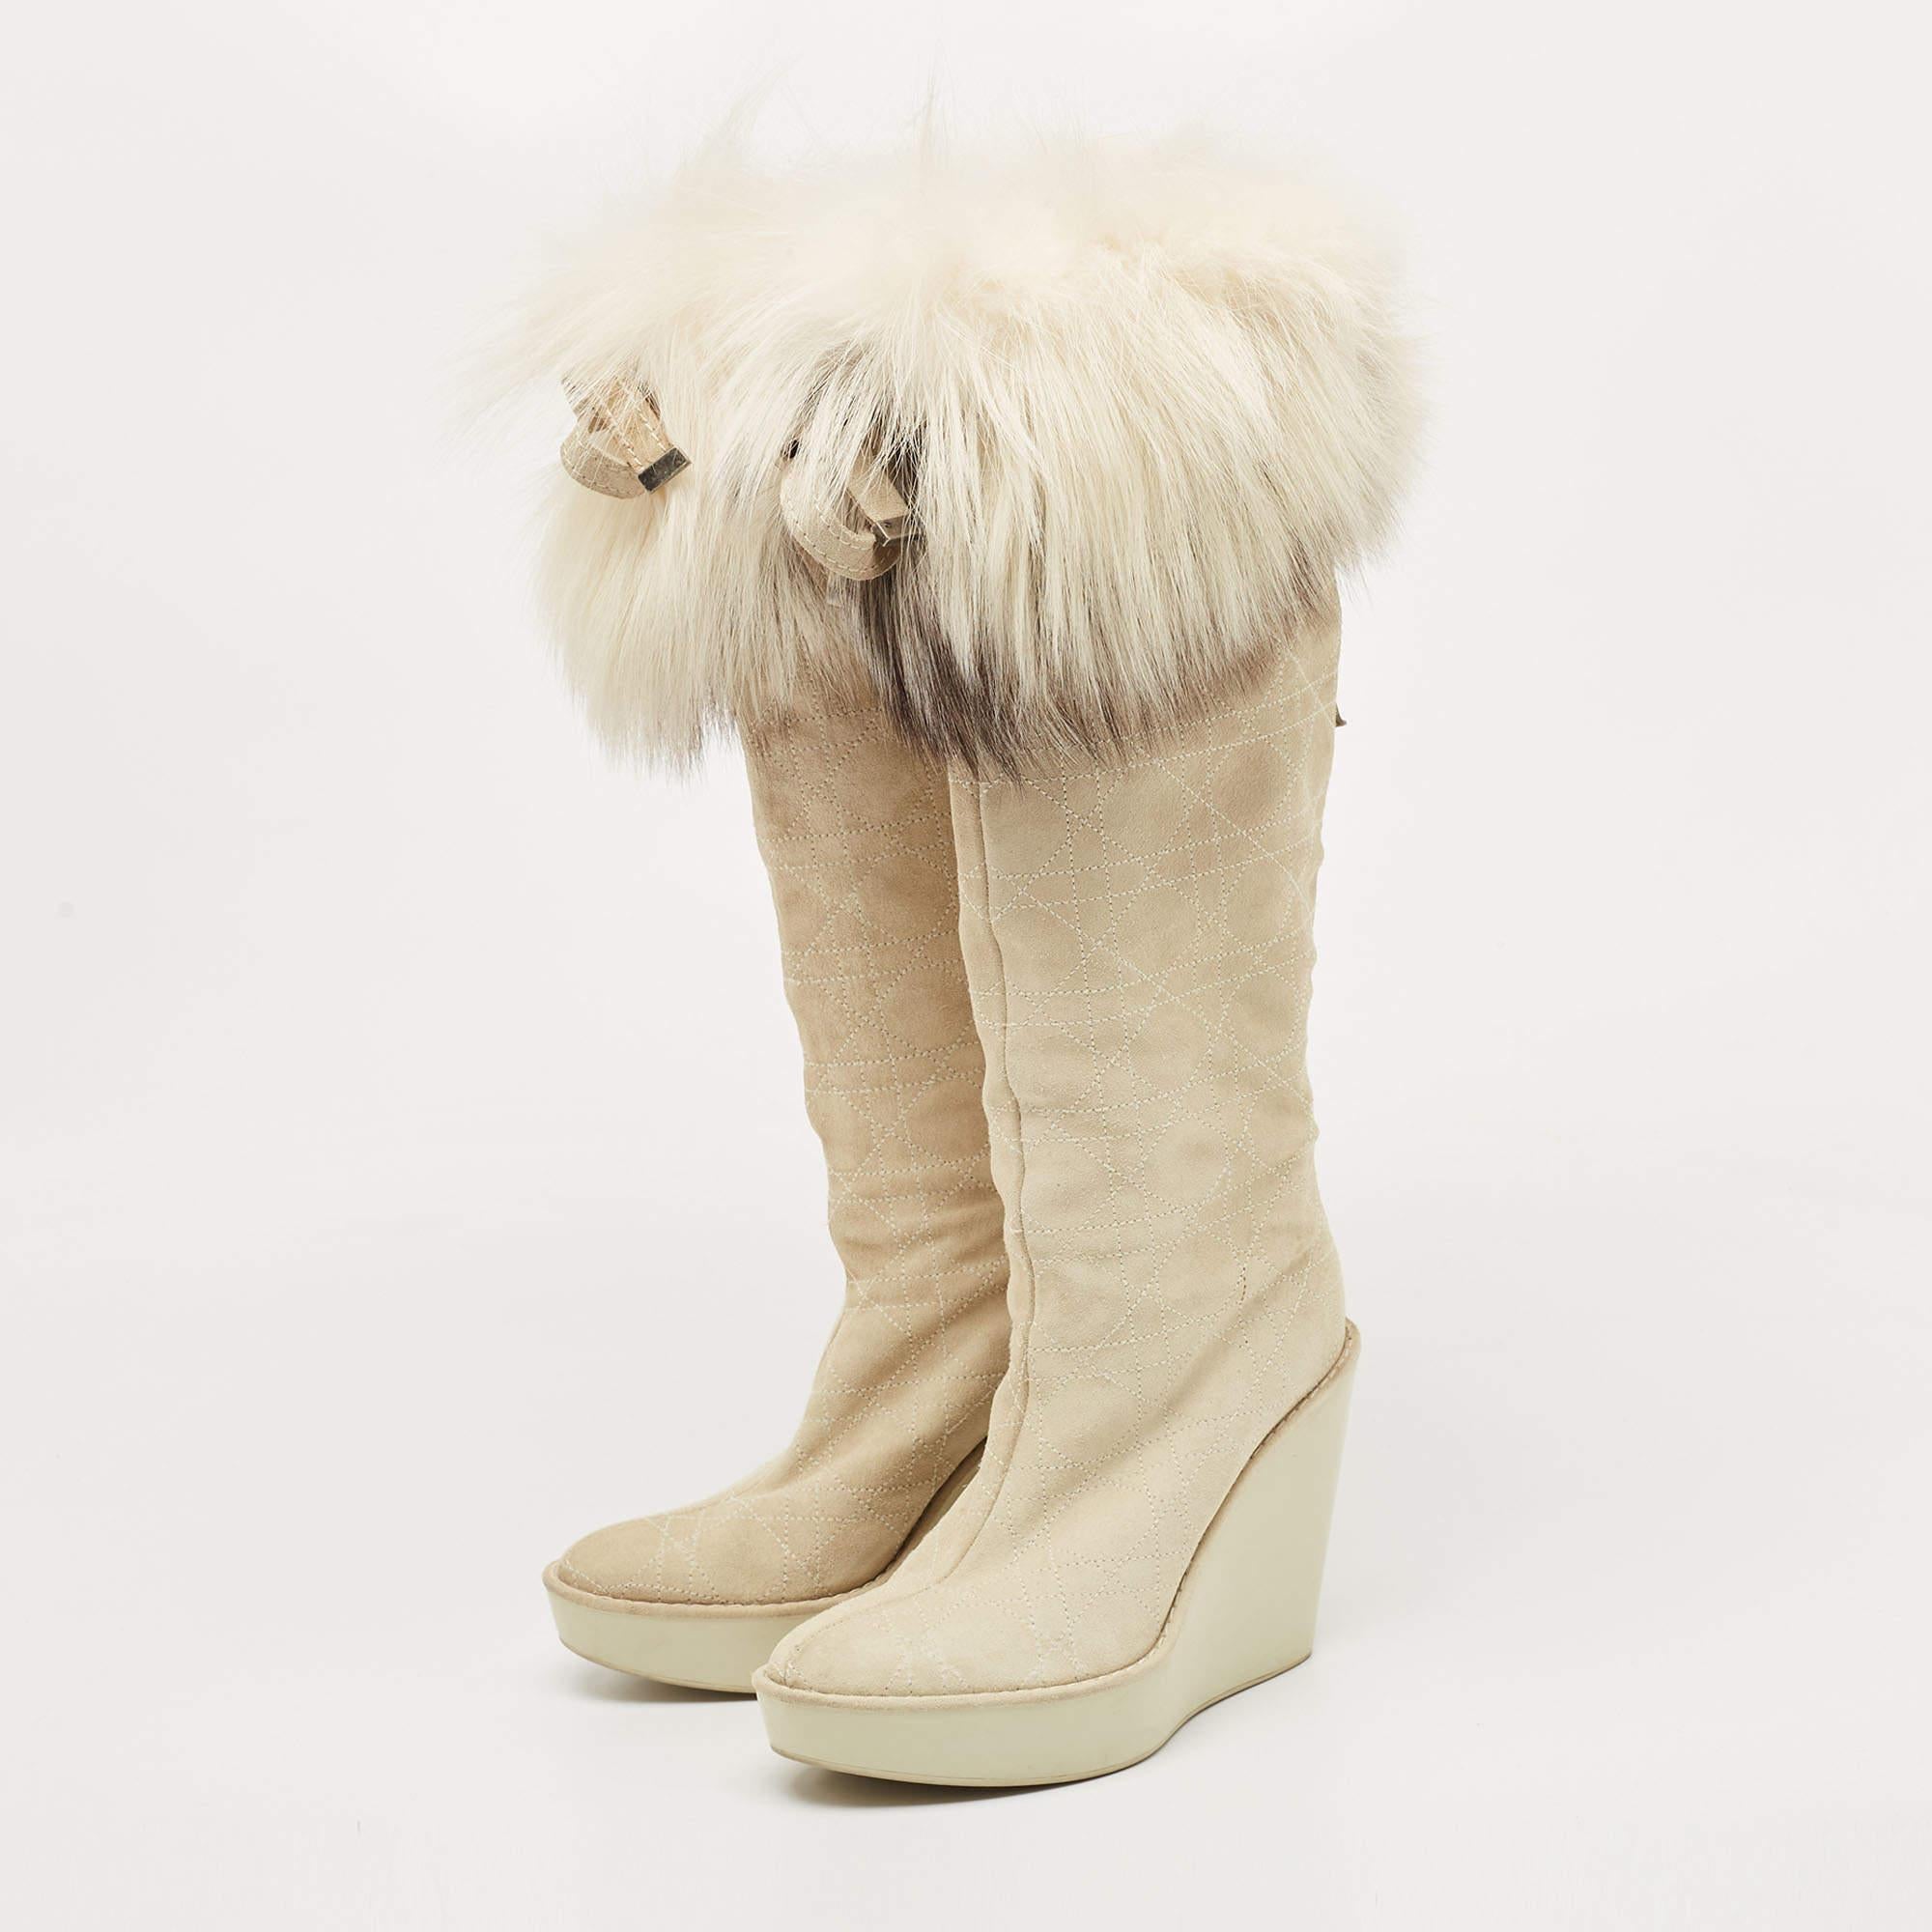 From the mega brand Dior comes this pair of boots that has been crafted from suede and designed with their Cannage quilt and fox fur trims with ties on the uppers. The boots are also embellished with crystal D charms on the back and they're balanced